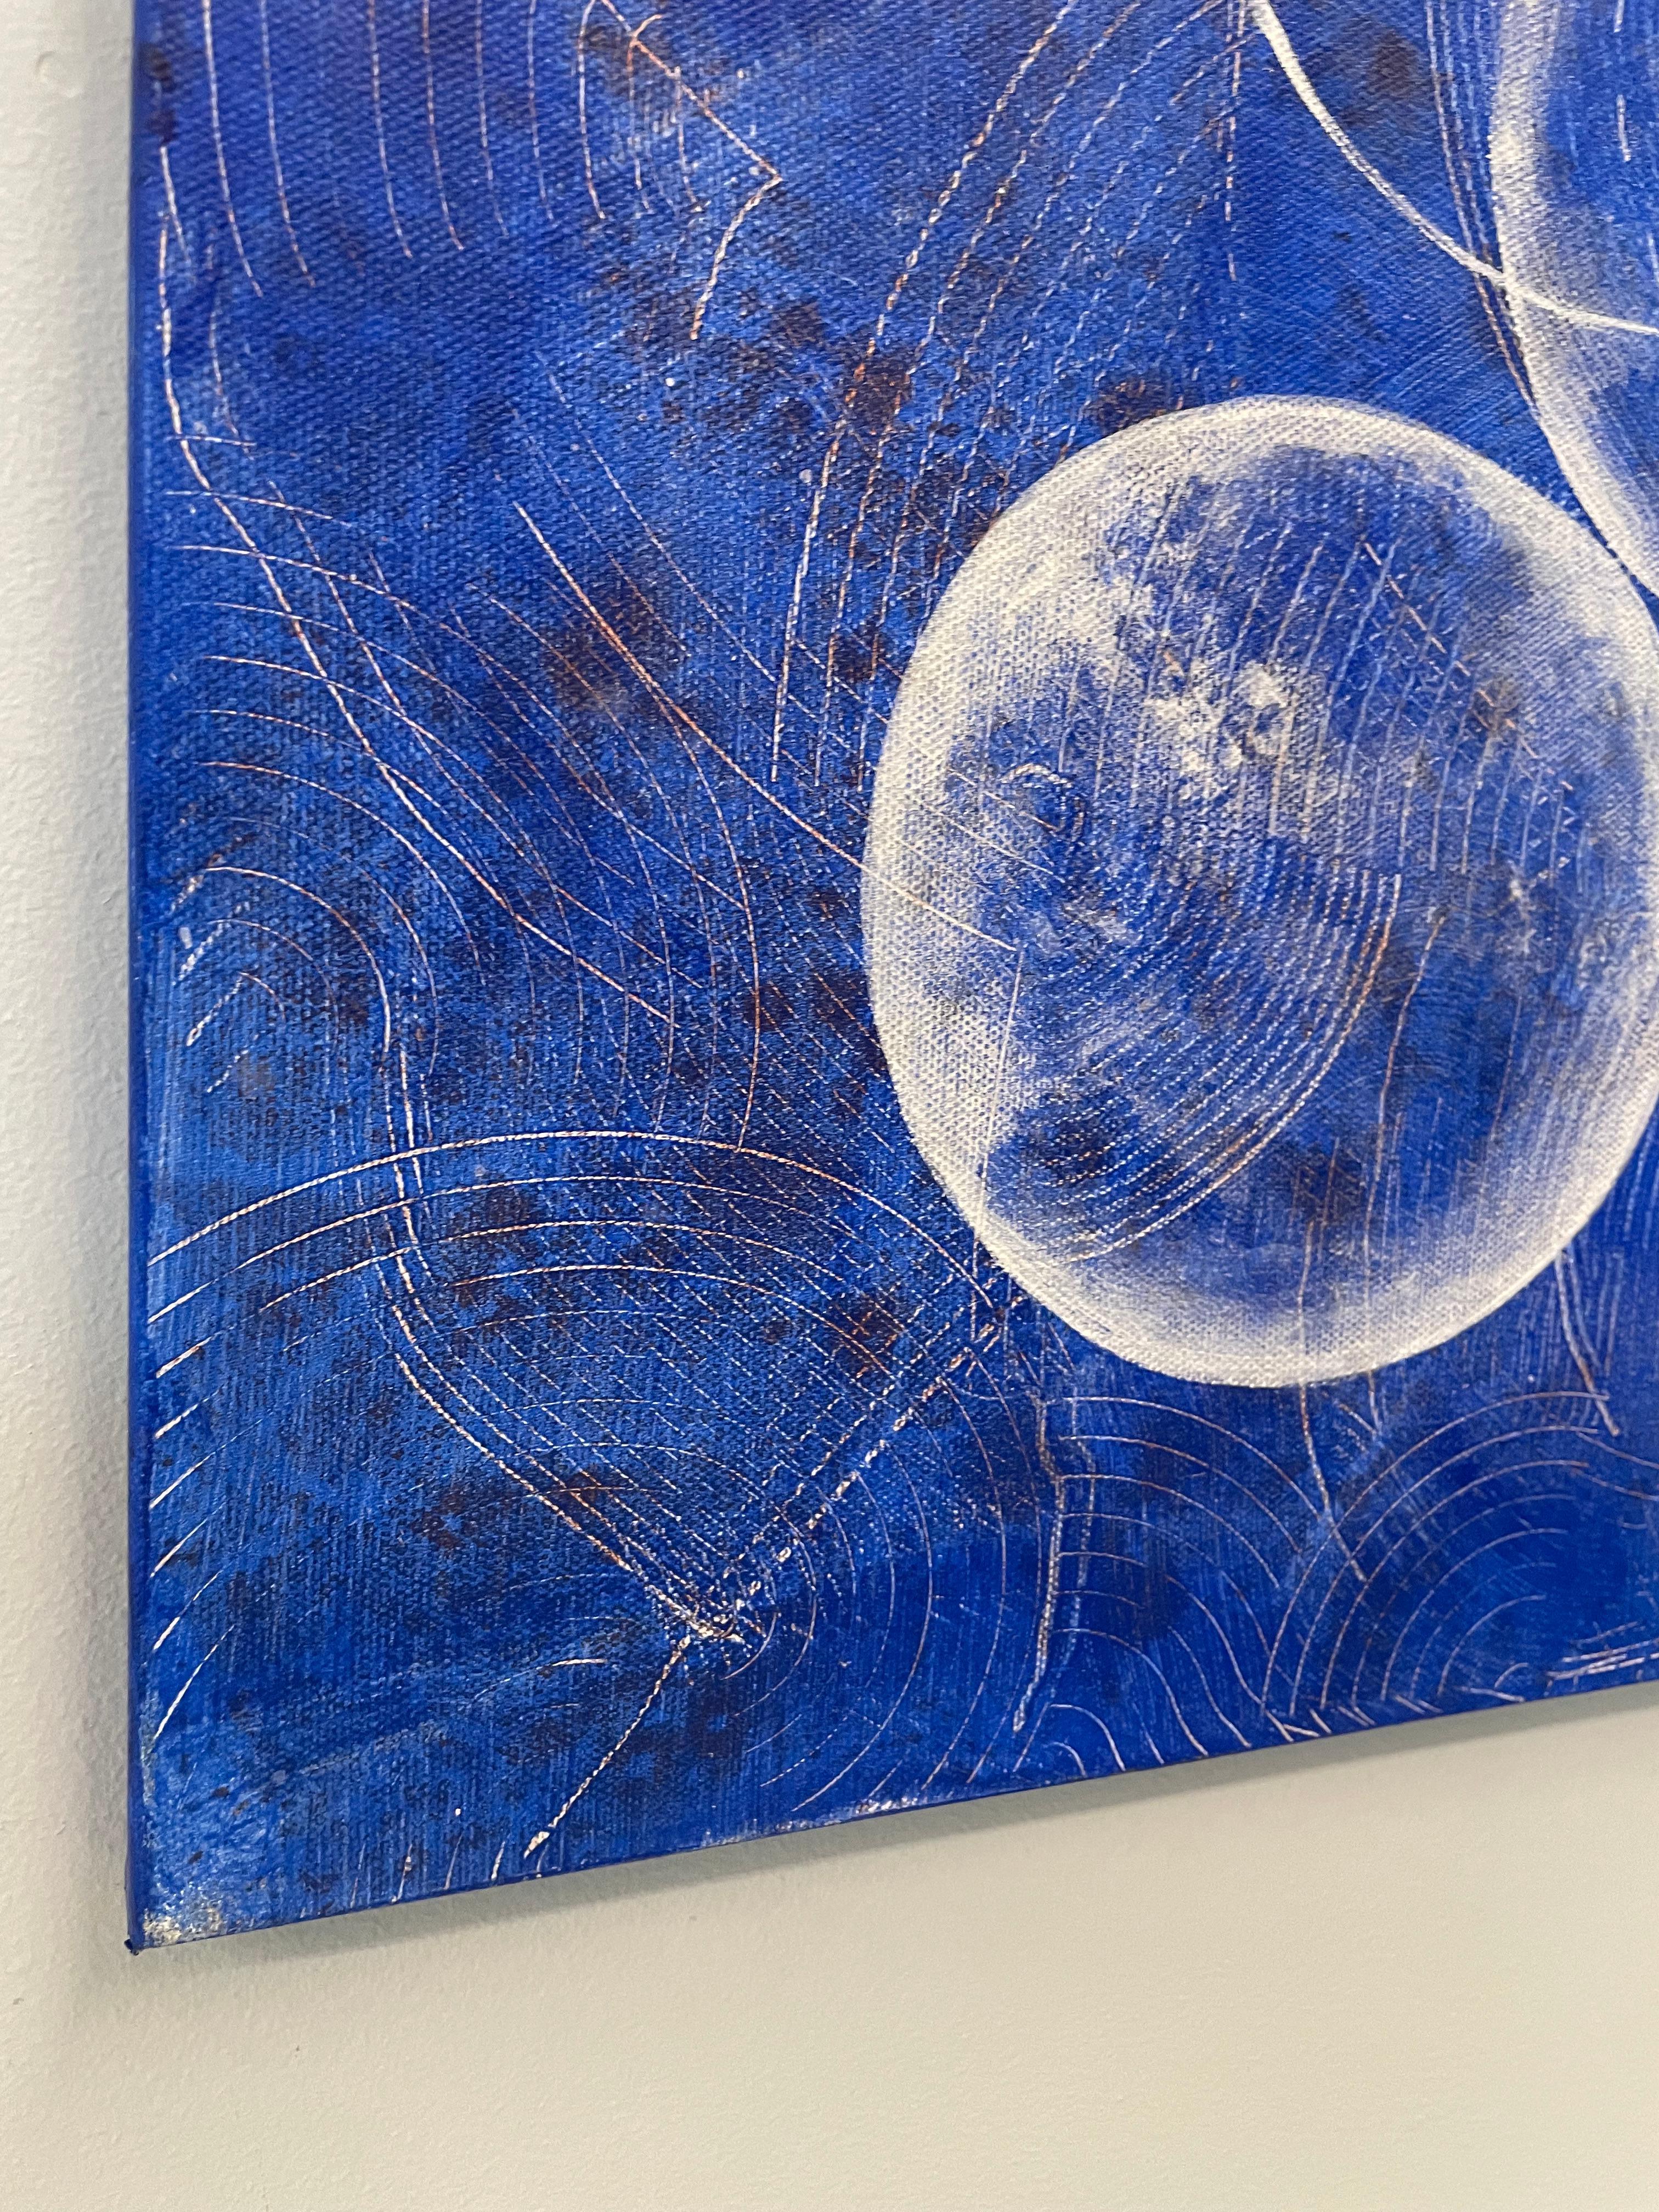 BALANCED I -  Large gestural abstract painting in blue and white  - Painting by Andra Samelson